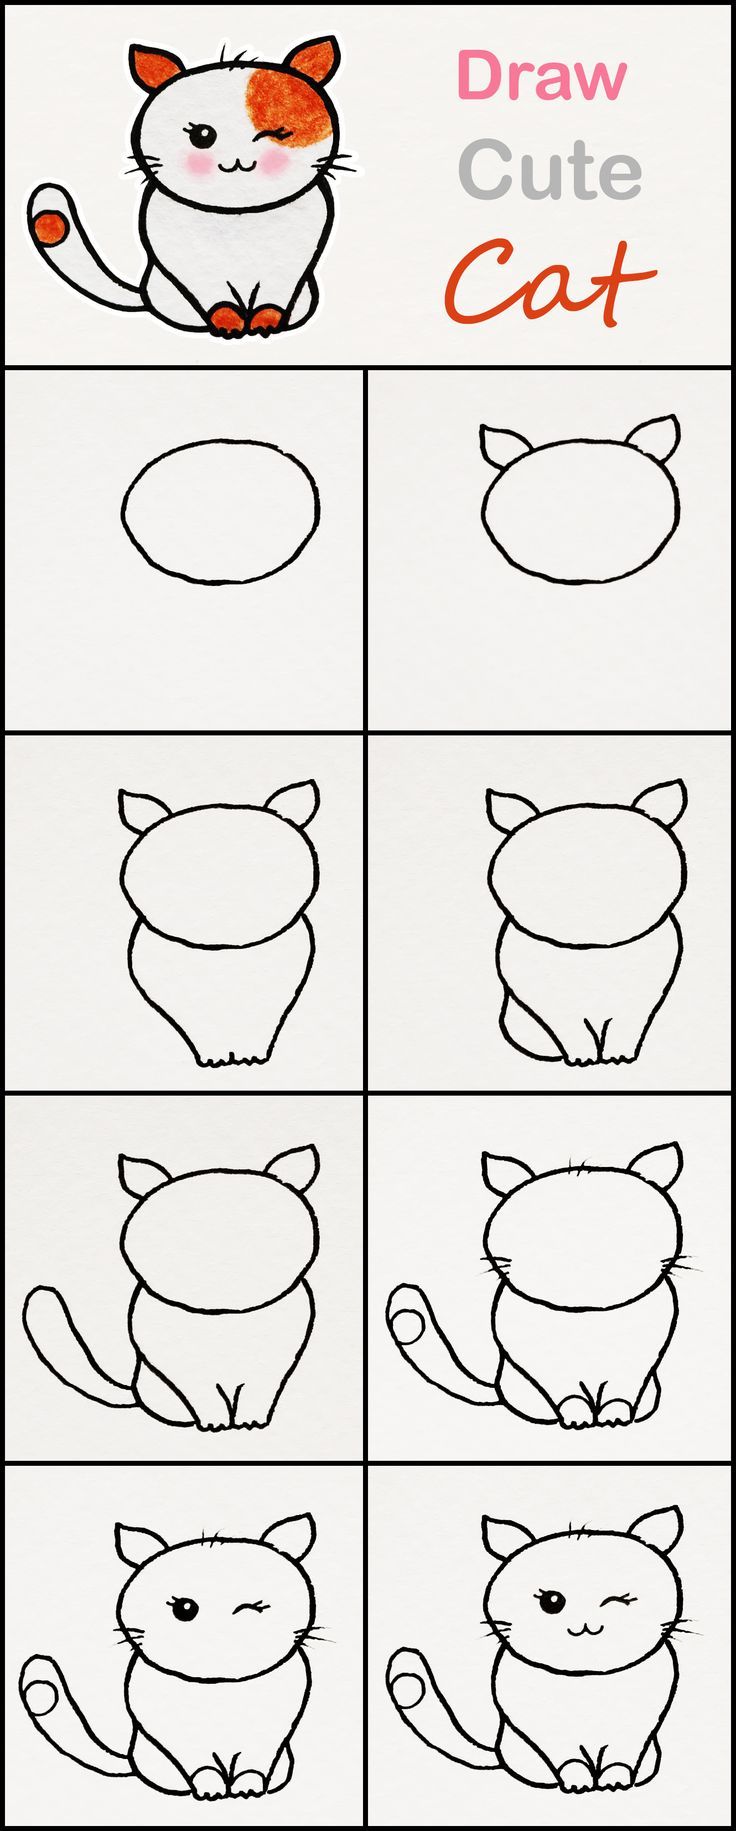 How to draw a cute Cat | Step by step art for kids